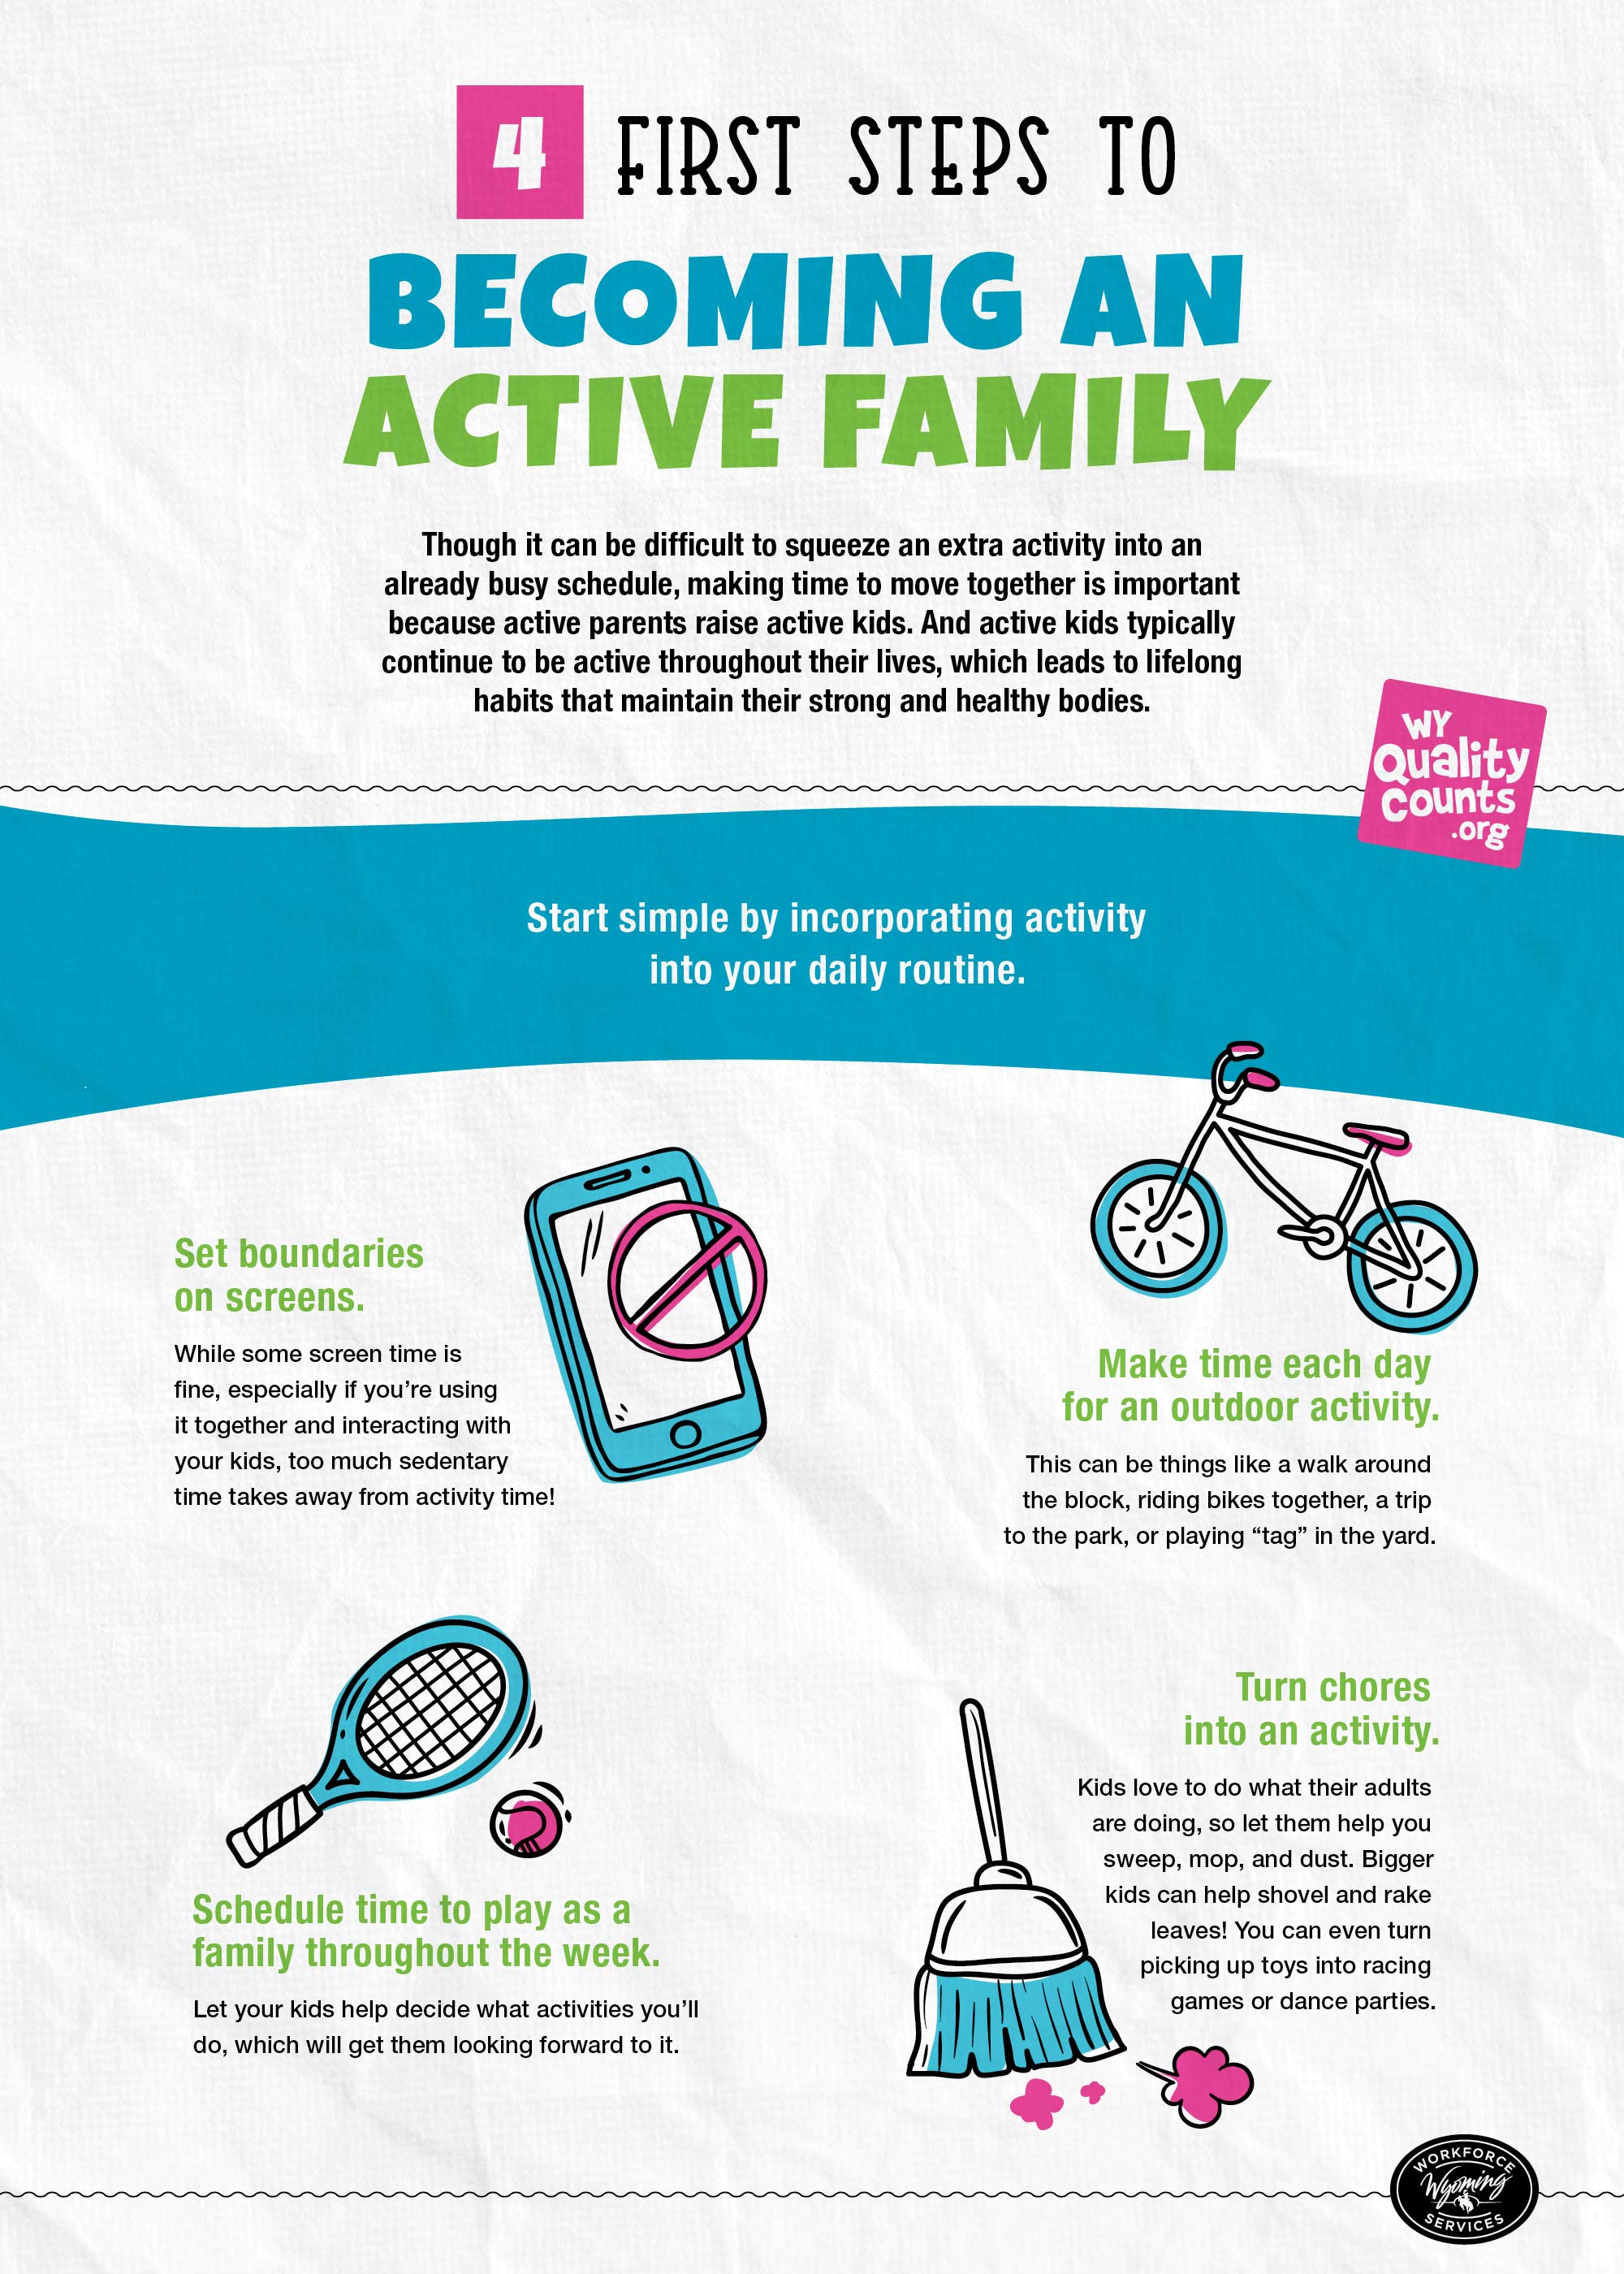 How-to-Become-an-Active-Family